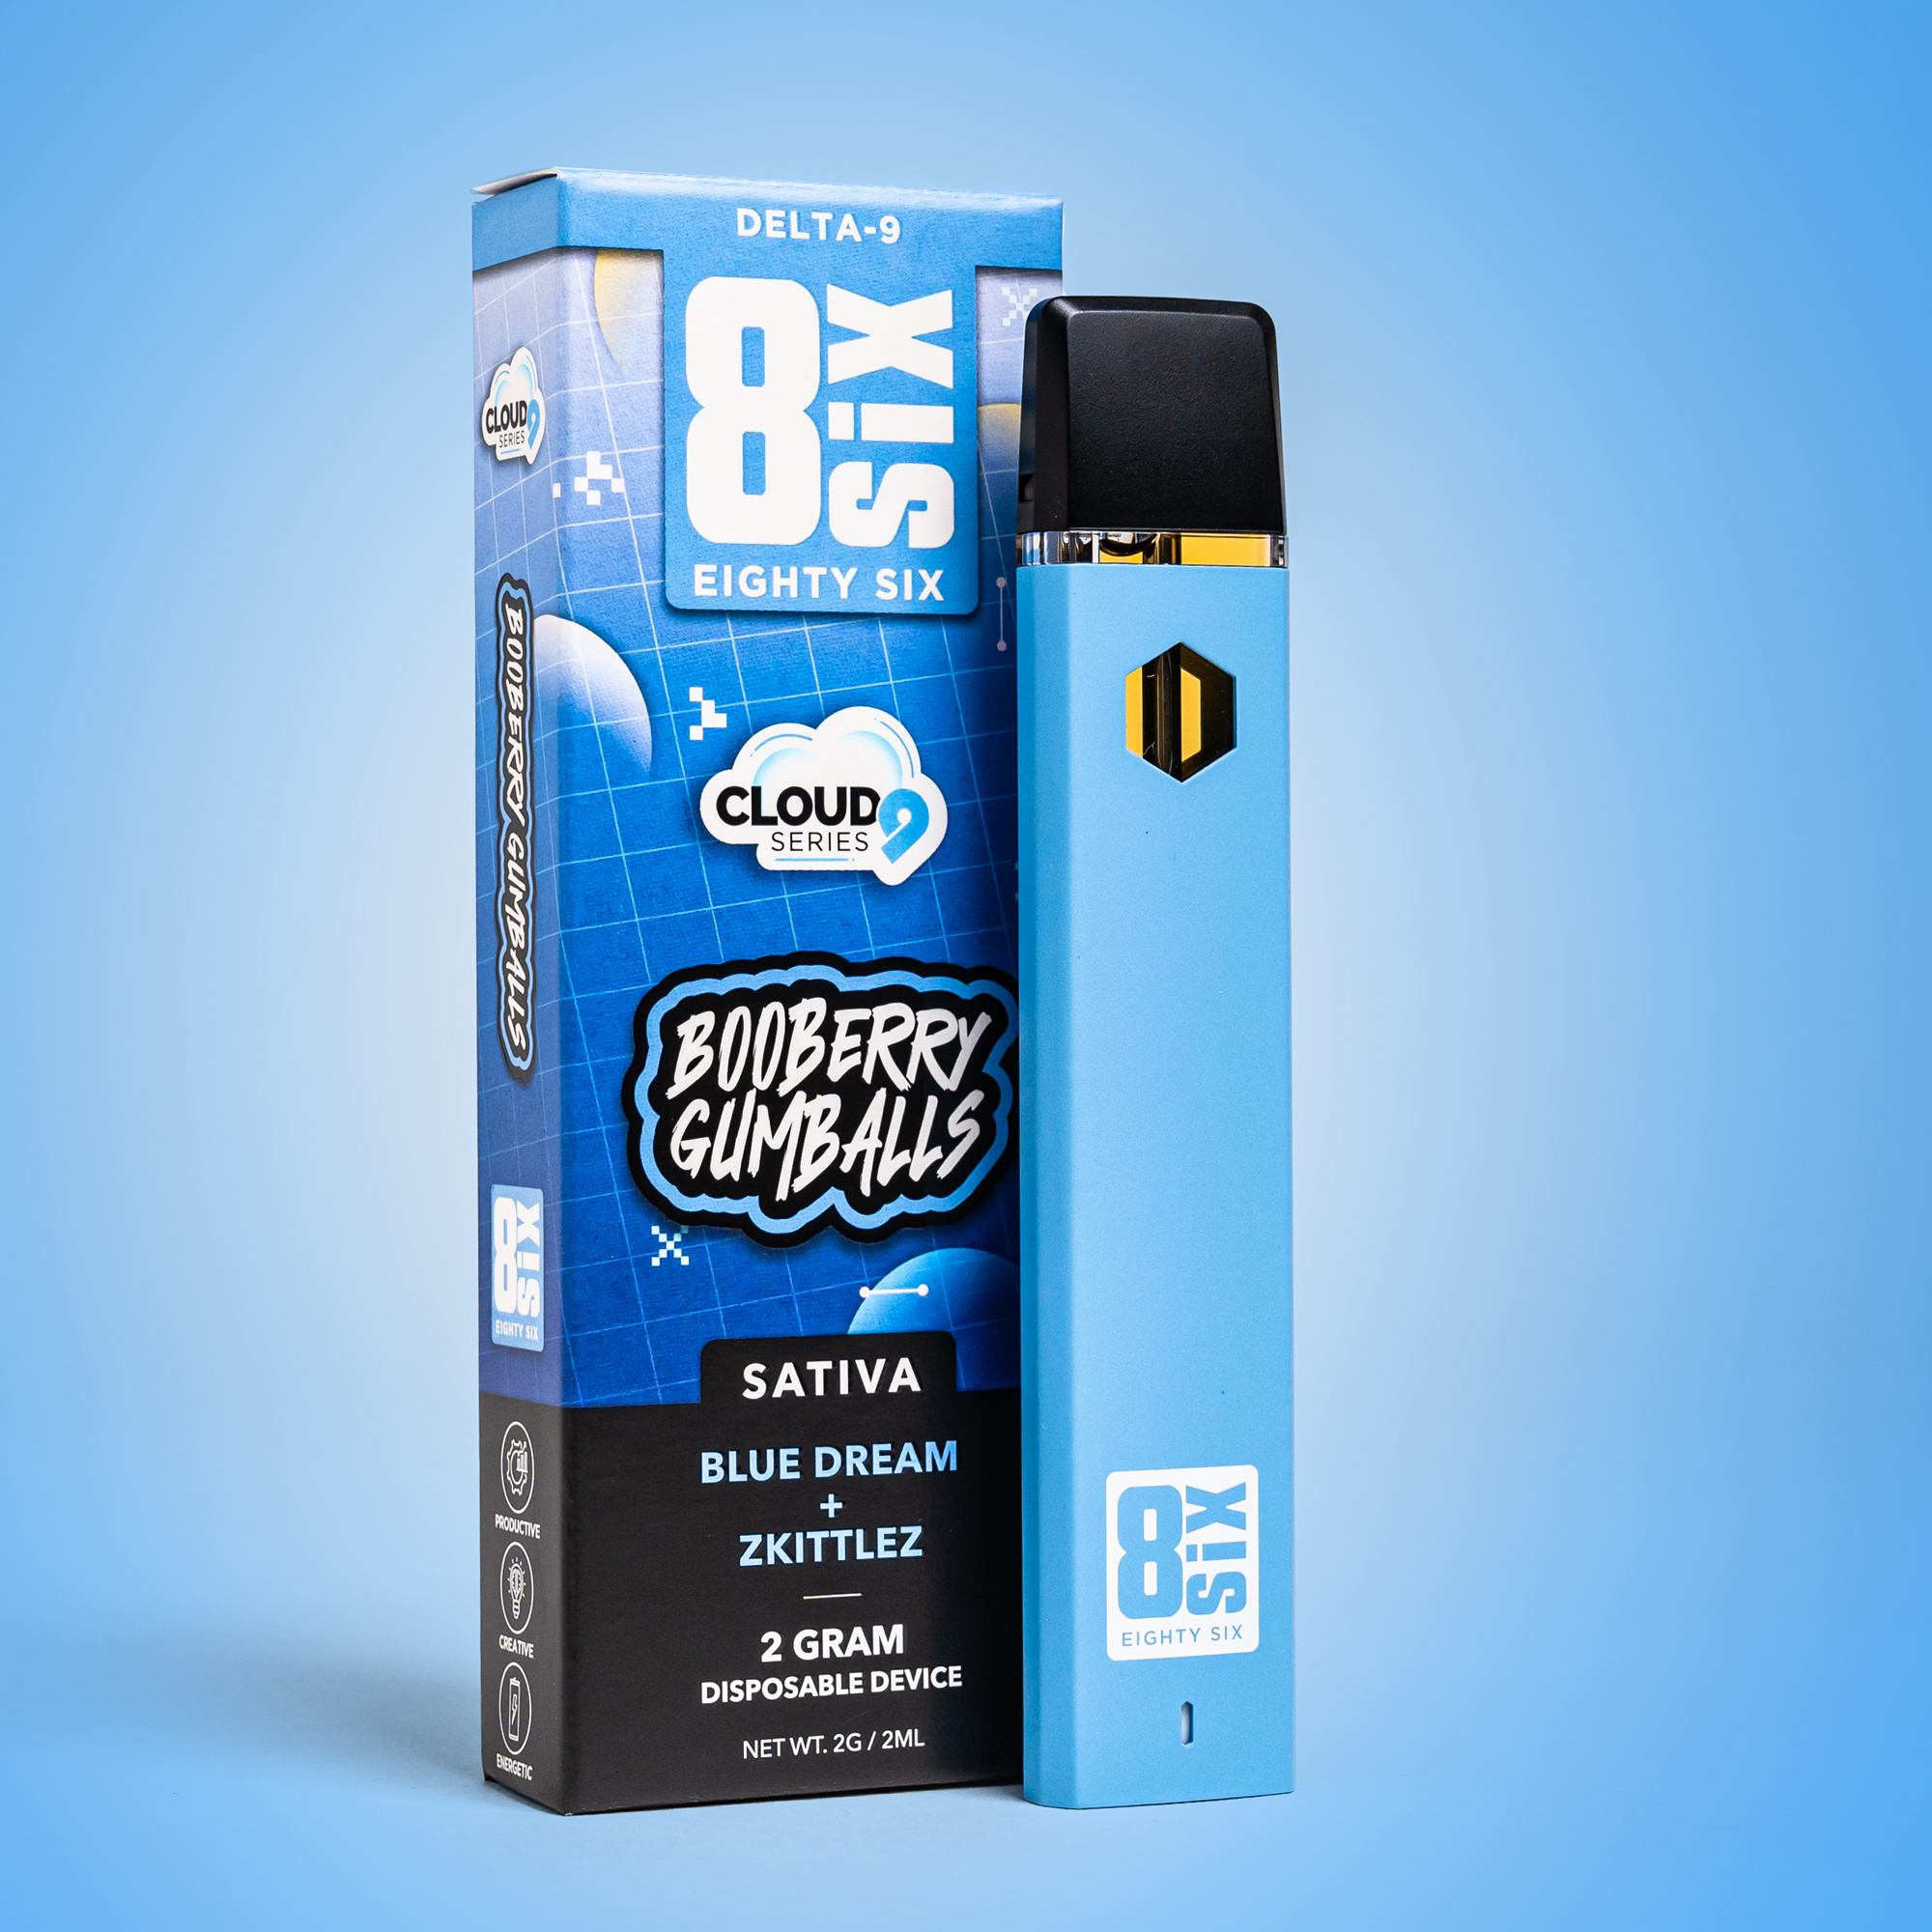 Eighty Six Booberry Gumballs Delta-9 THC 2G Disposable (Blue Dream) Best Price